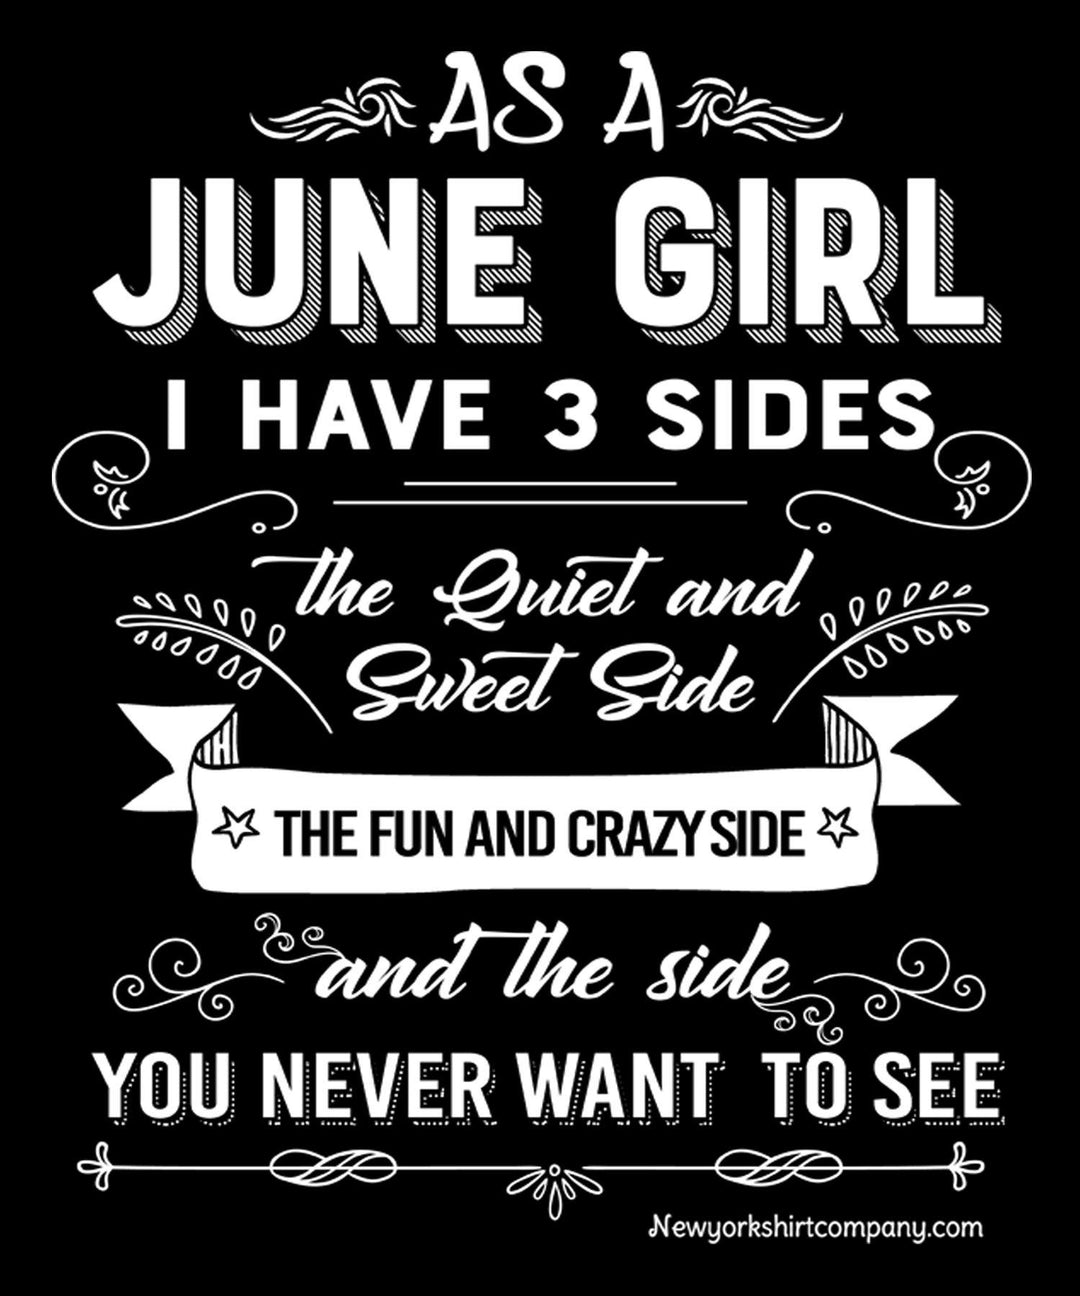 As a June Girl I have 3 Sides & pre-approved for Free Jewelry worth $45